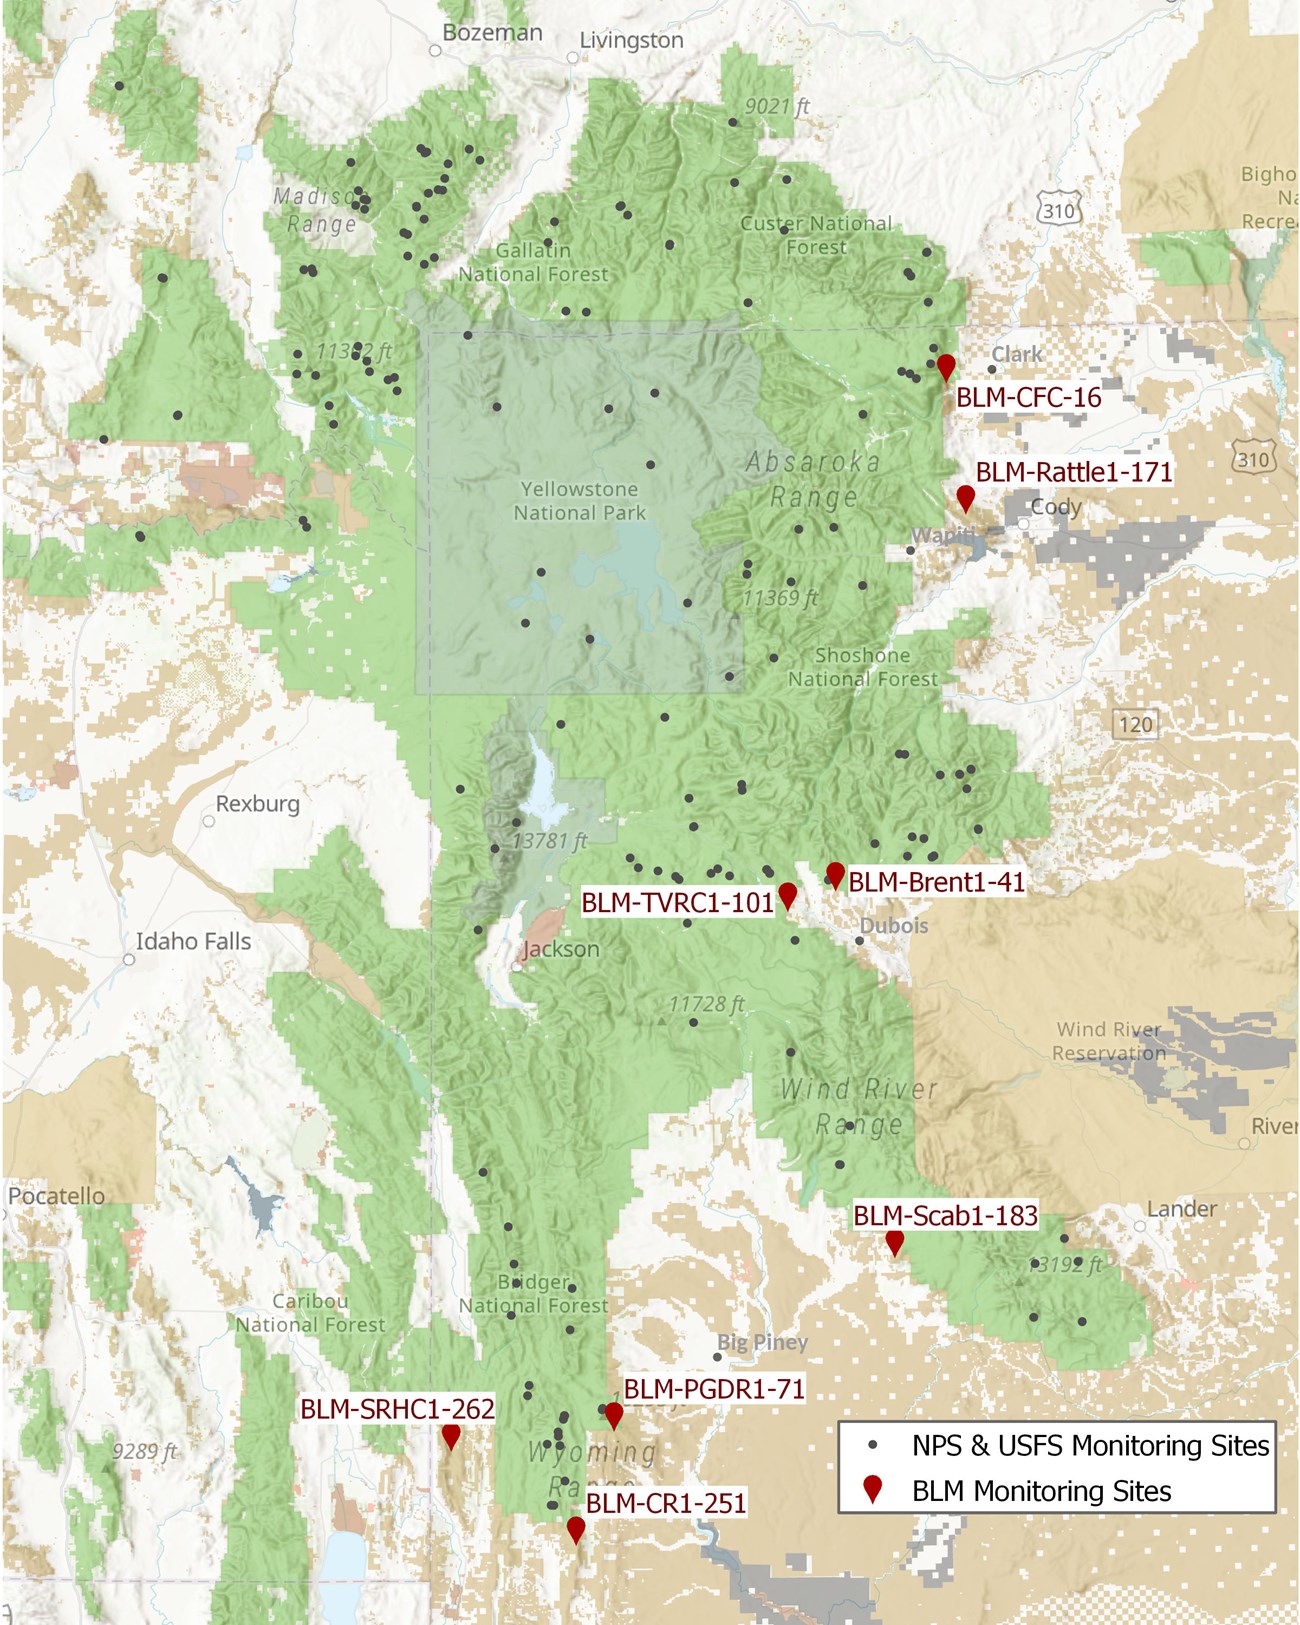 Map of Greater Yellowstone Ecosystem showing study area sites.